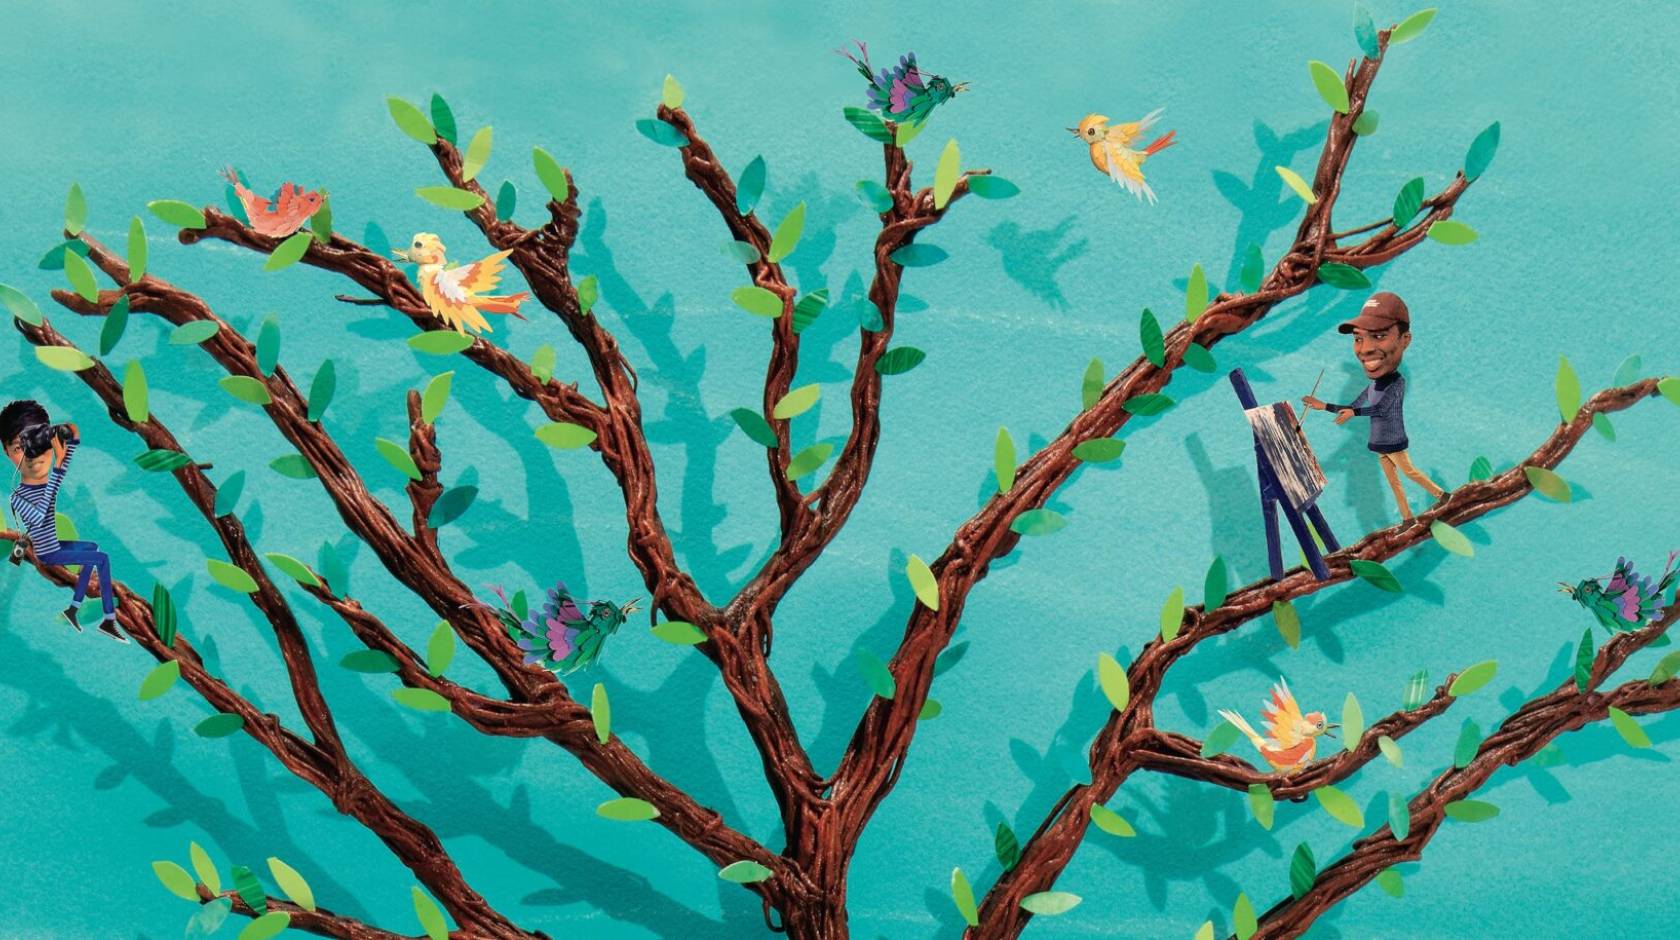 Illustration of a brown tree against a turquoise background, with tiny people and birds on its branches